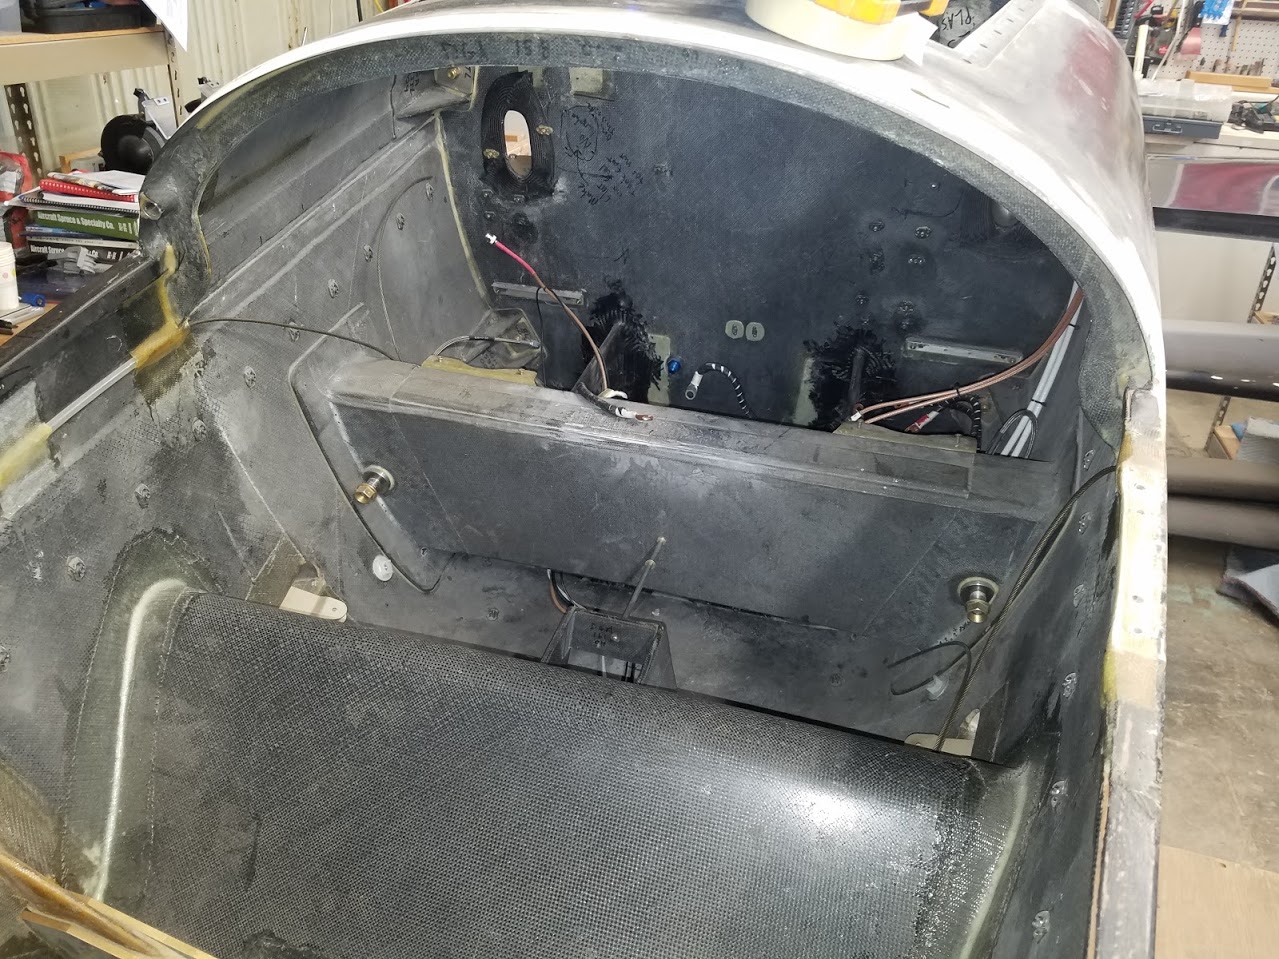 Wiring removed - view from cockpit